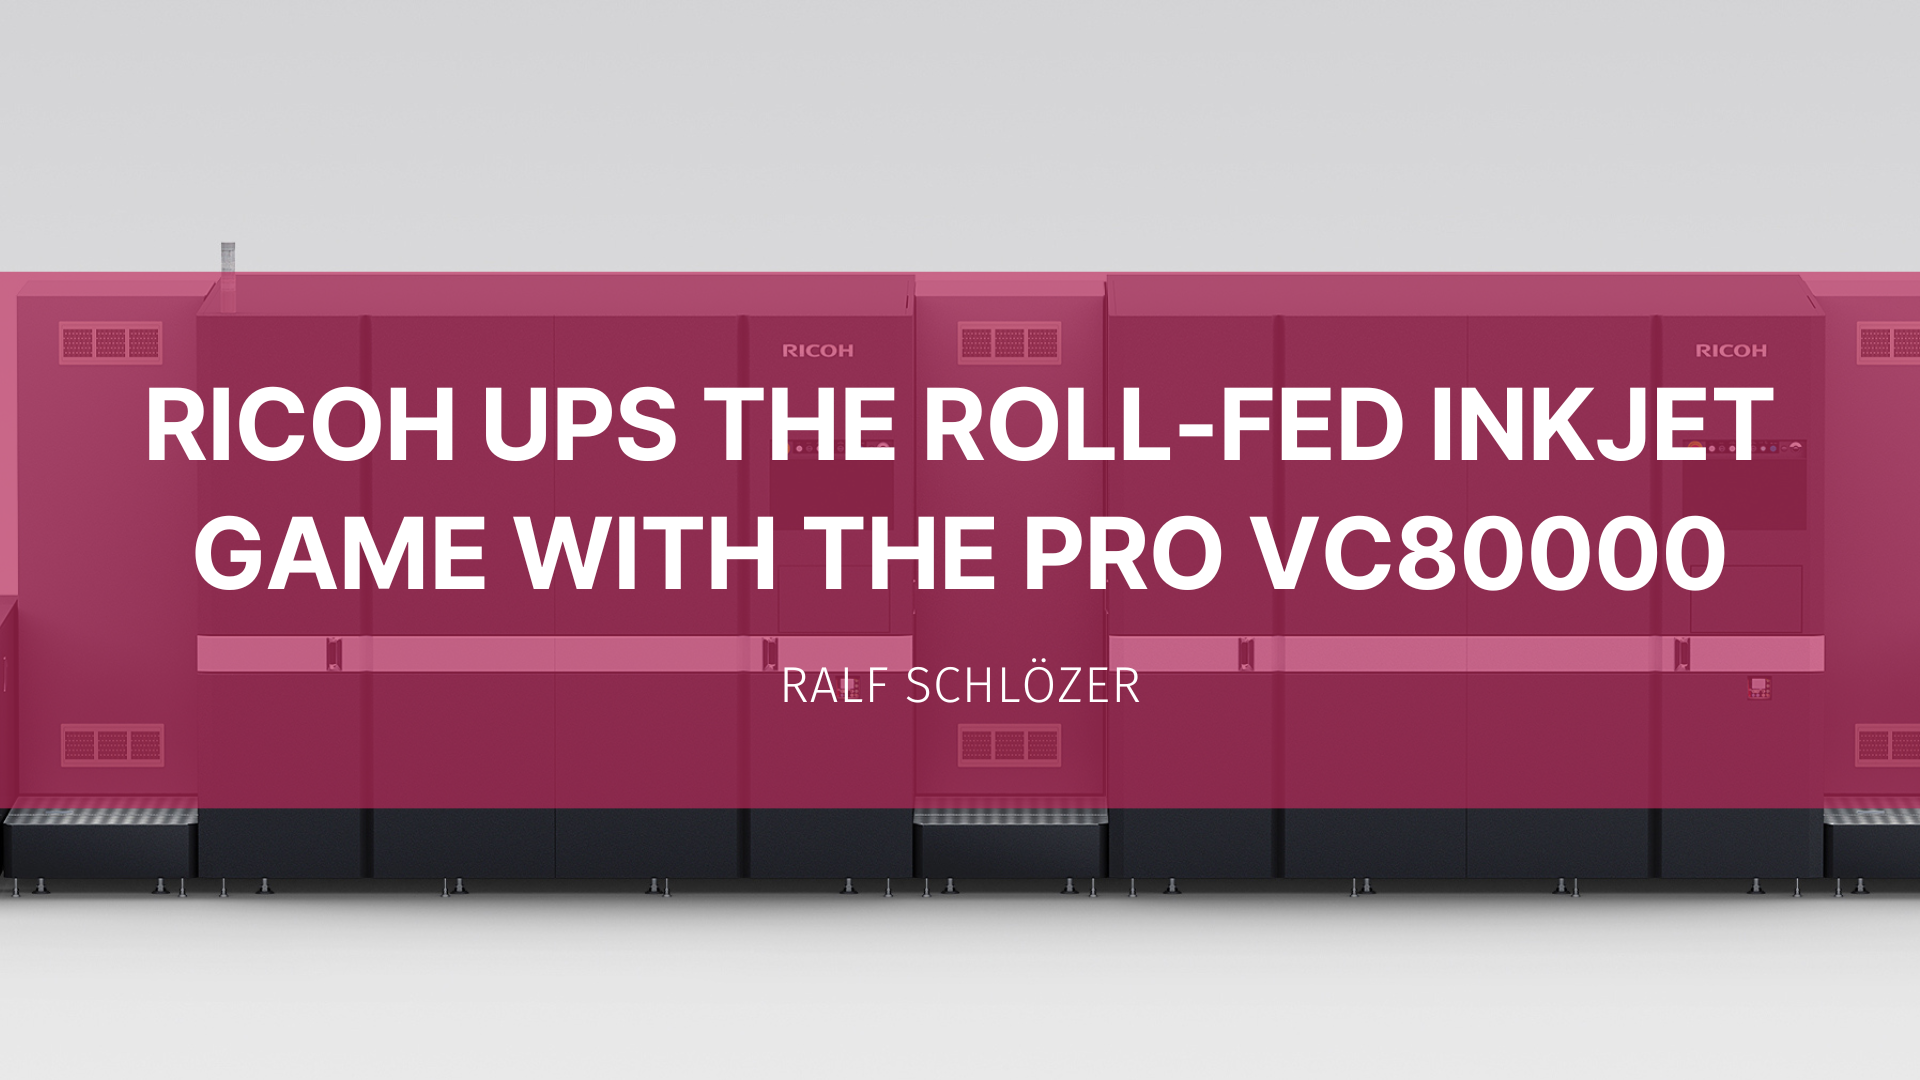 Featured image for “Ricoh ups the roll-fed inkjet game with the Pro VC80000”